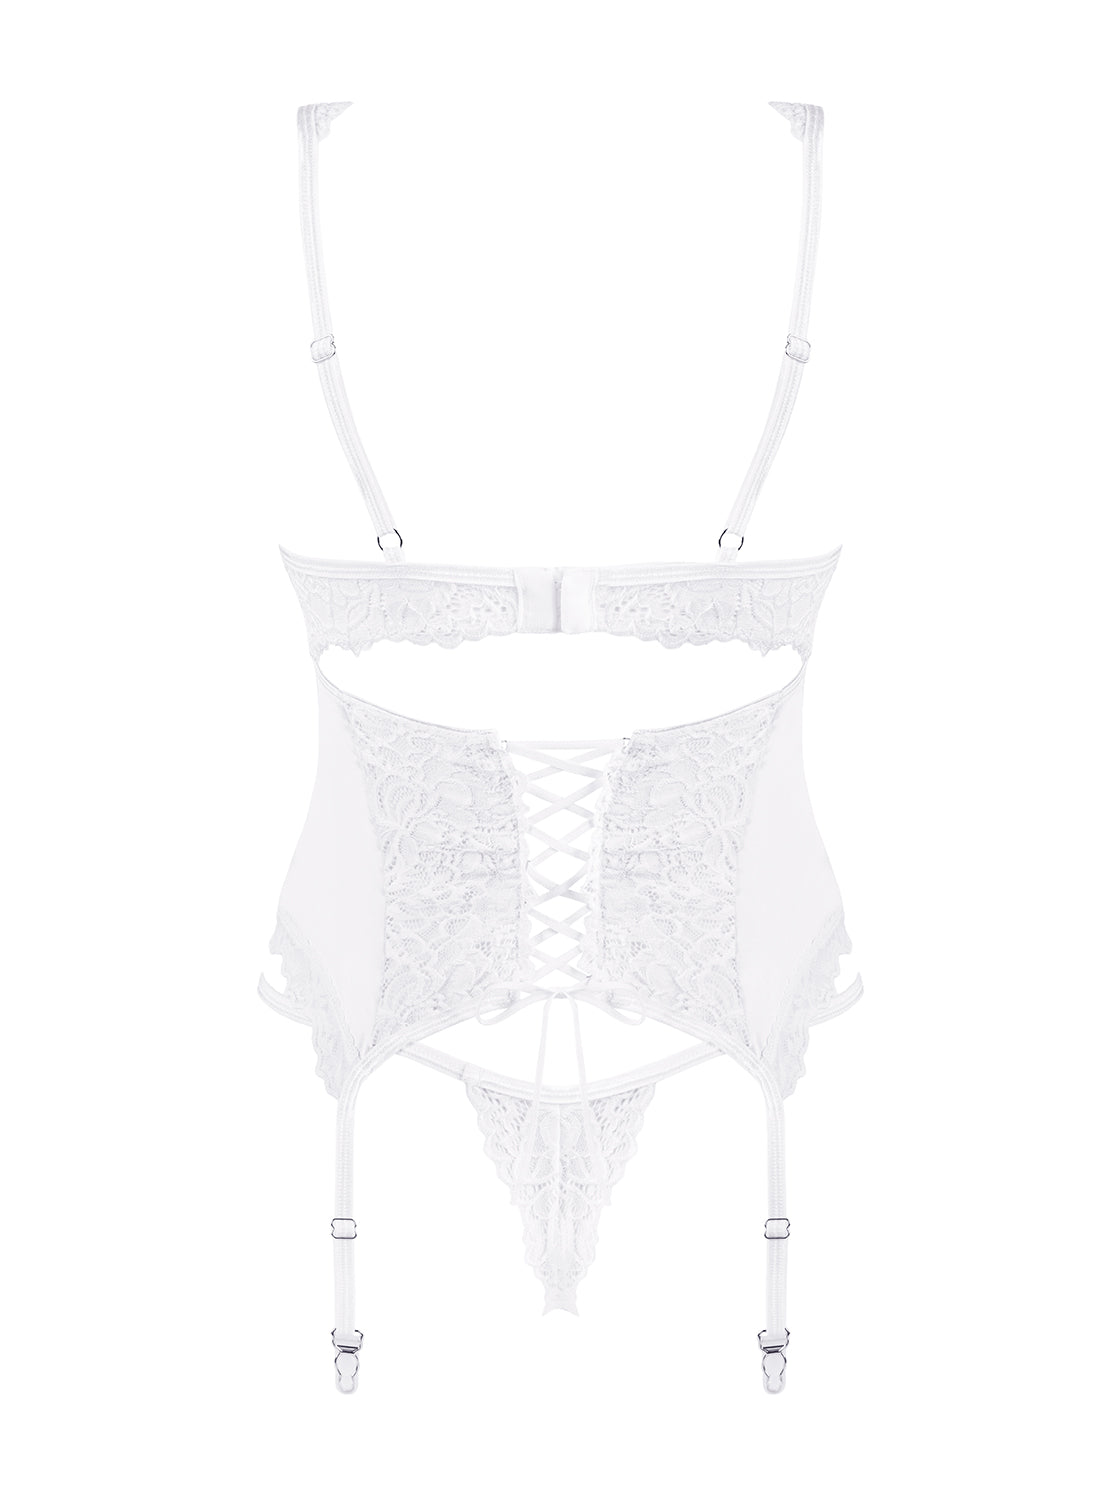 Charming white corset with elegant lace